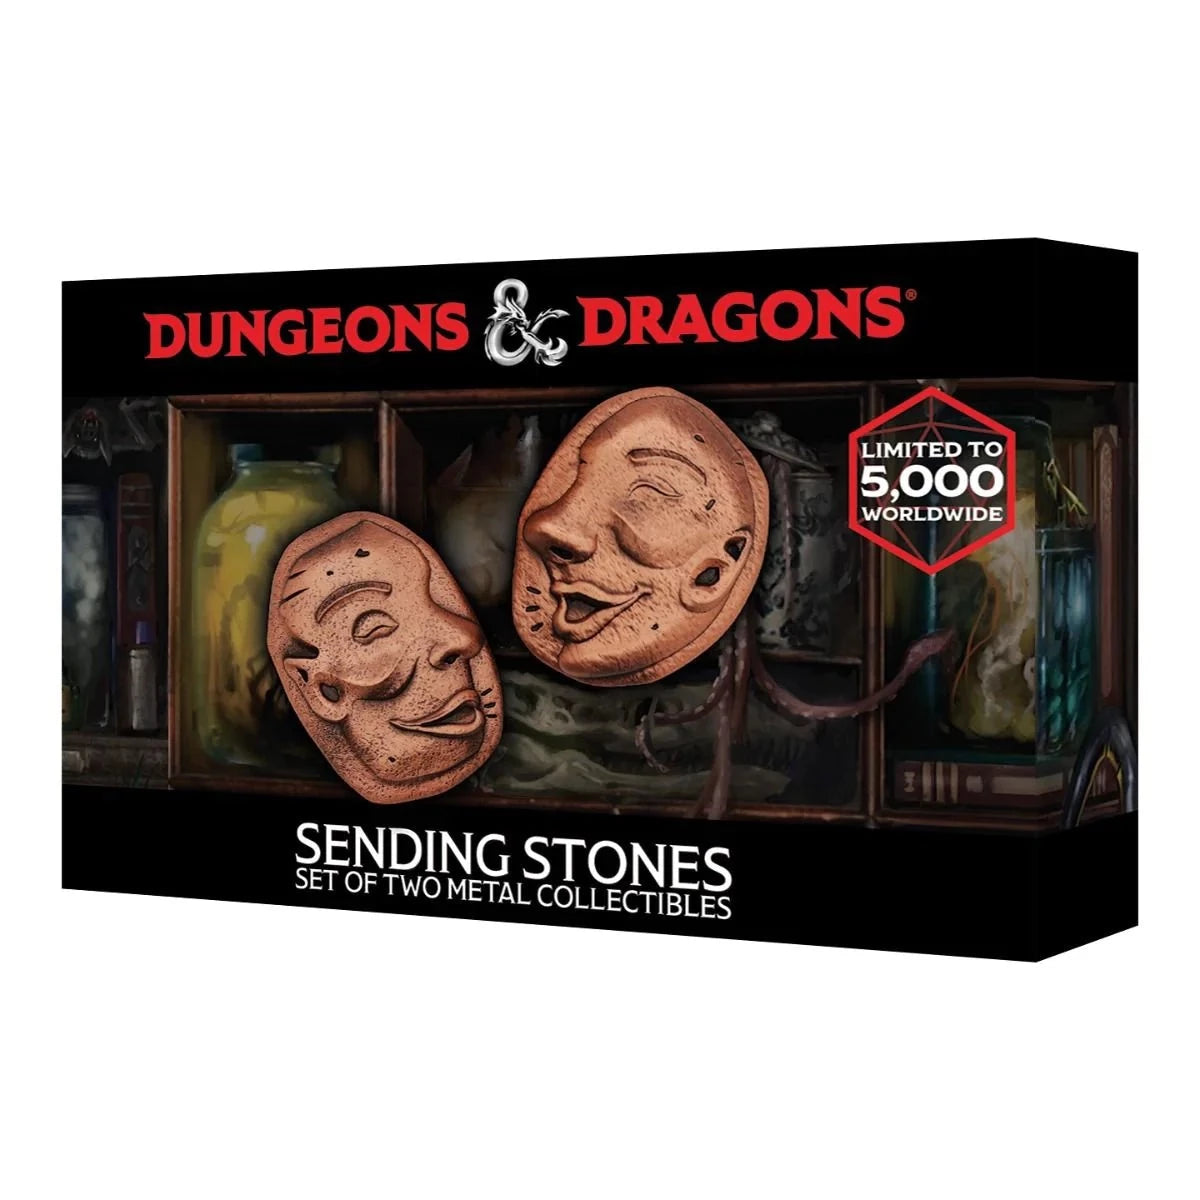 Dungeons & Dragons - Limited Edition Sending Stones - Loaded Dice